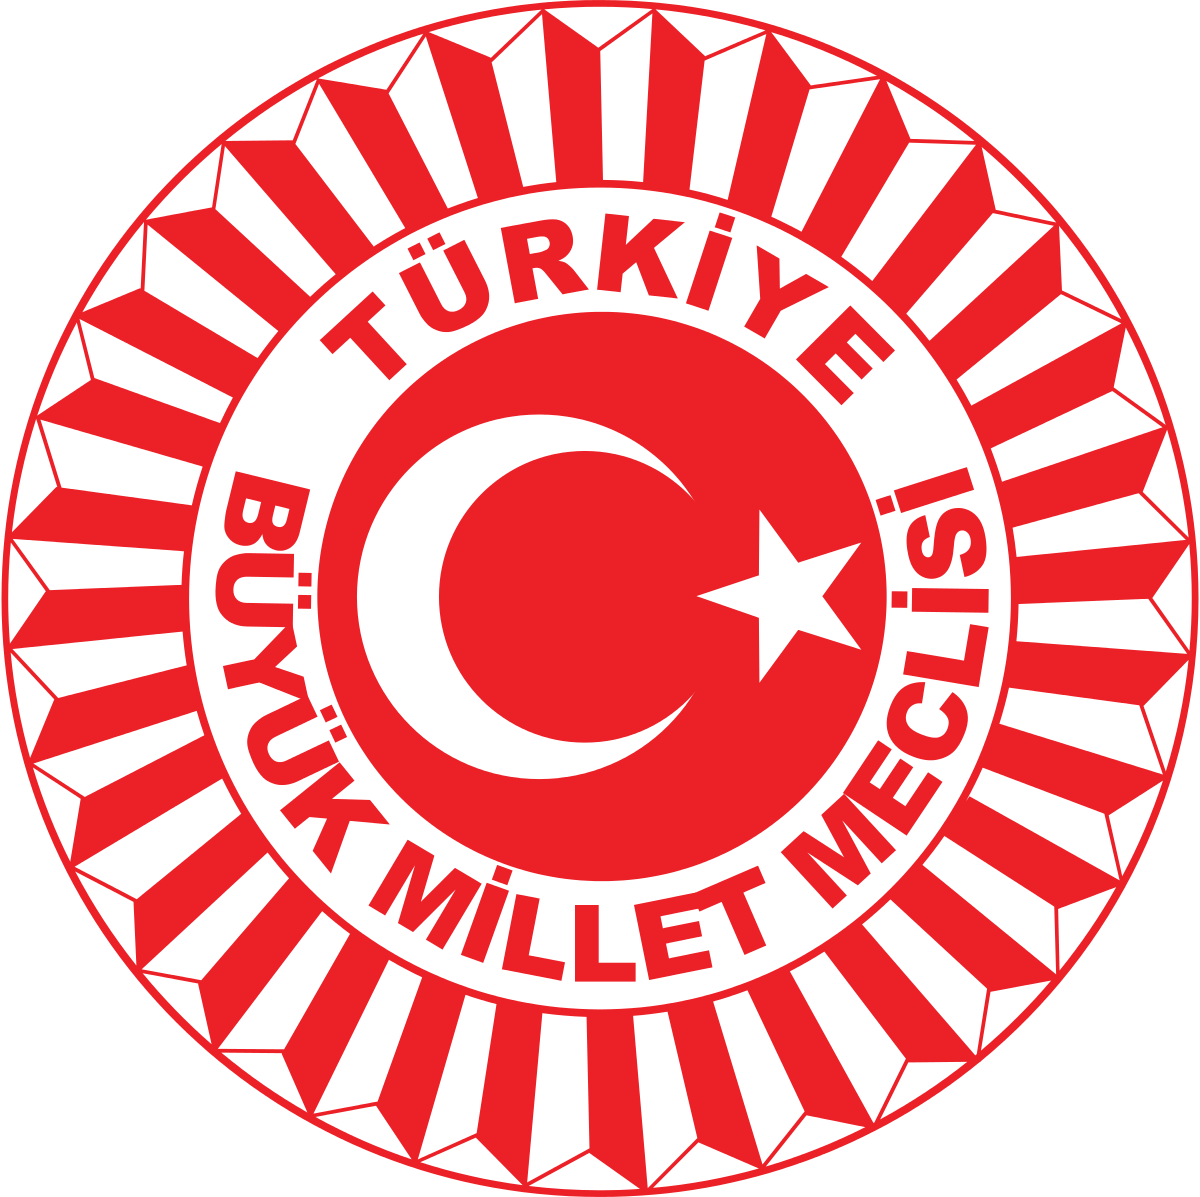 Grand national assembly of. Turkeys clipart profile